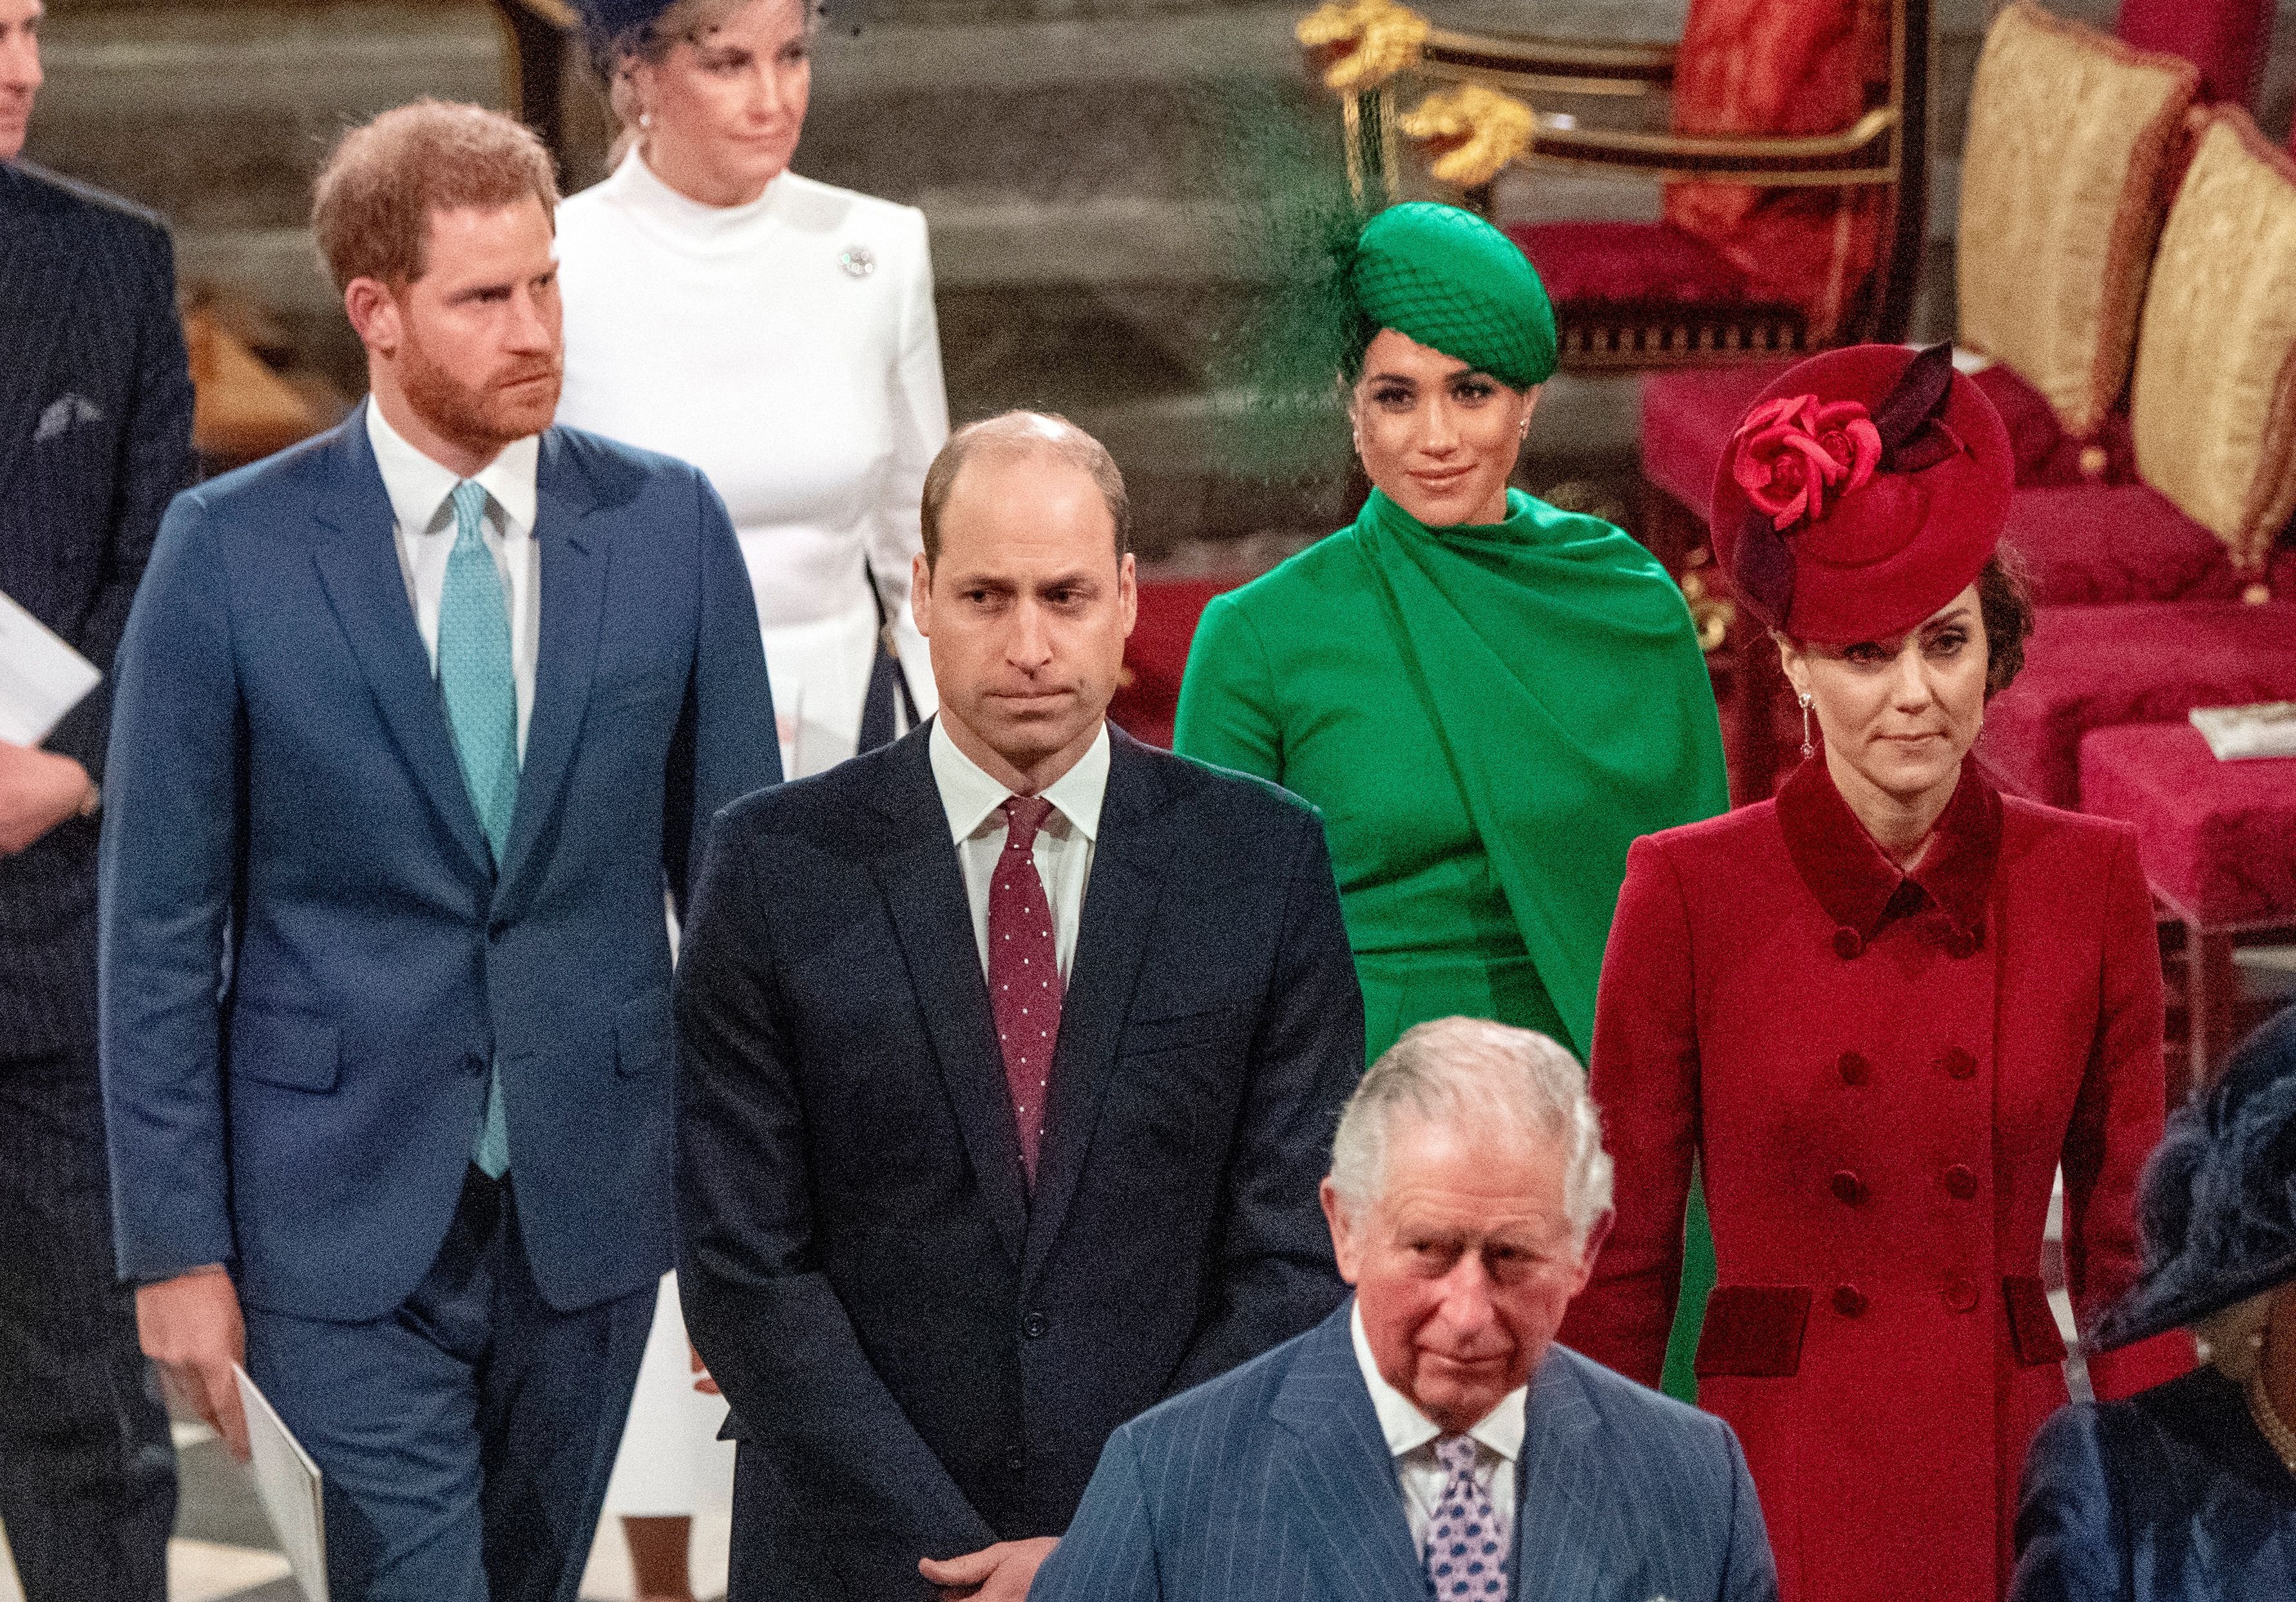 Prince Harry, Meghan Markle, Prince William, Kate Middleton, and Prince Charles photographed in Westminster Abbey after attending the annual Commonwealth Service in London on March 9, 2020 | Source: Getty Images